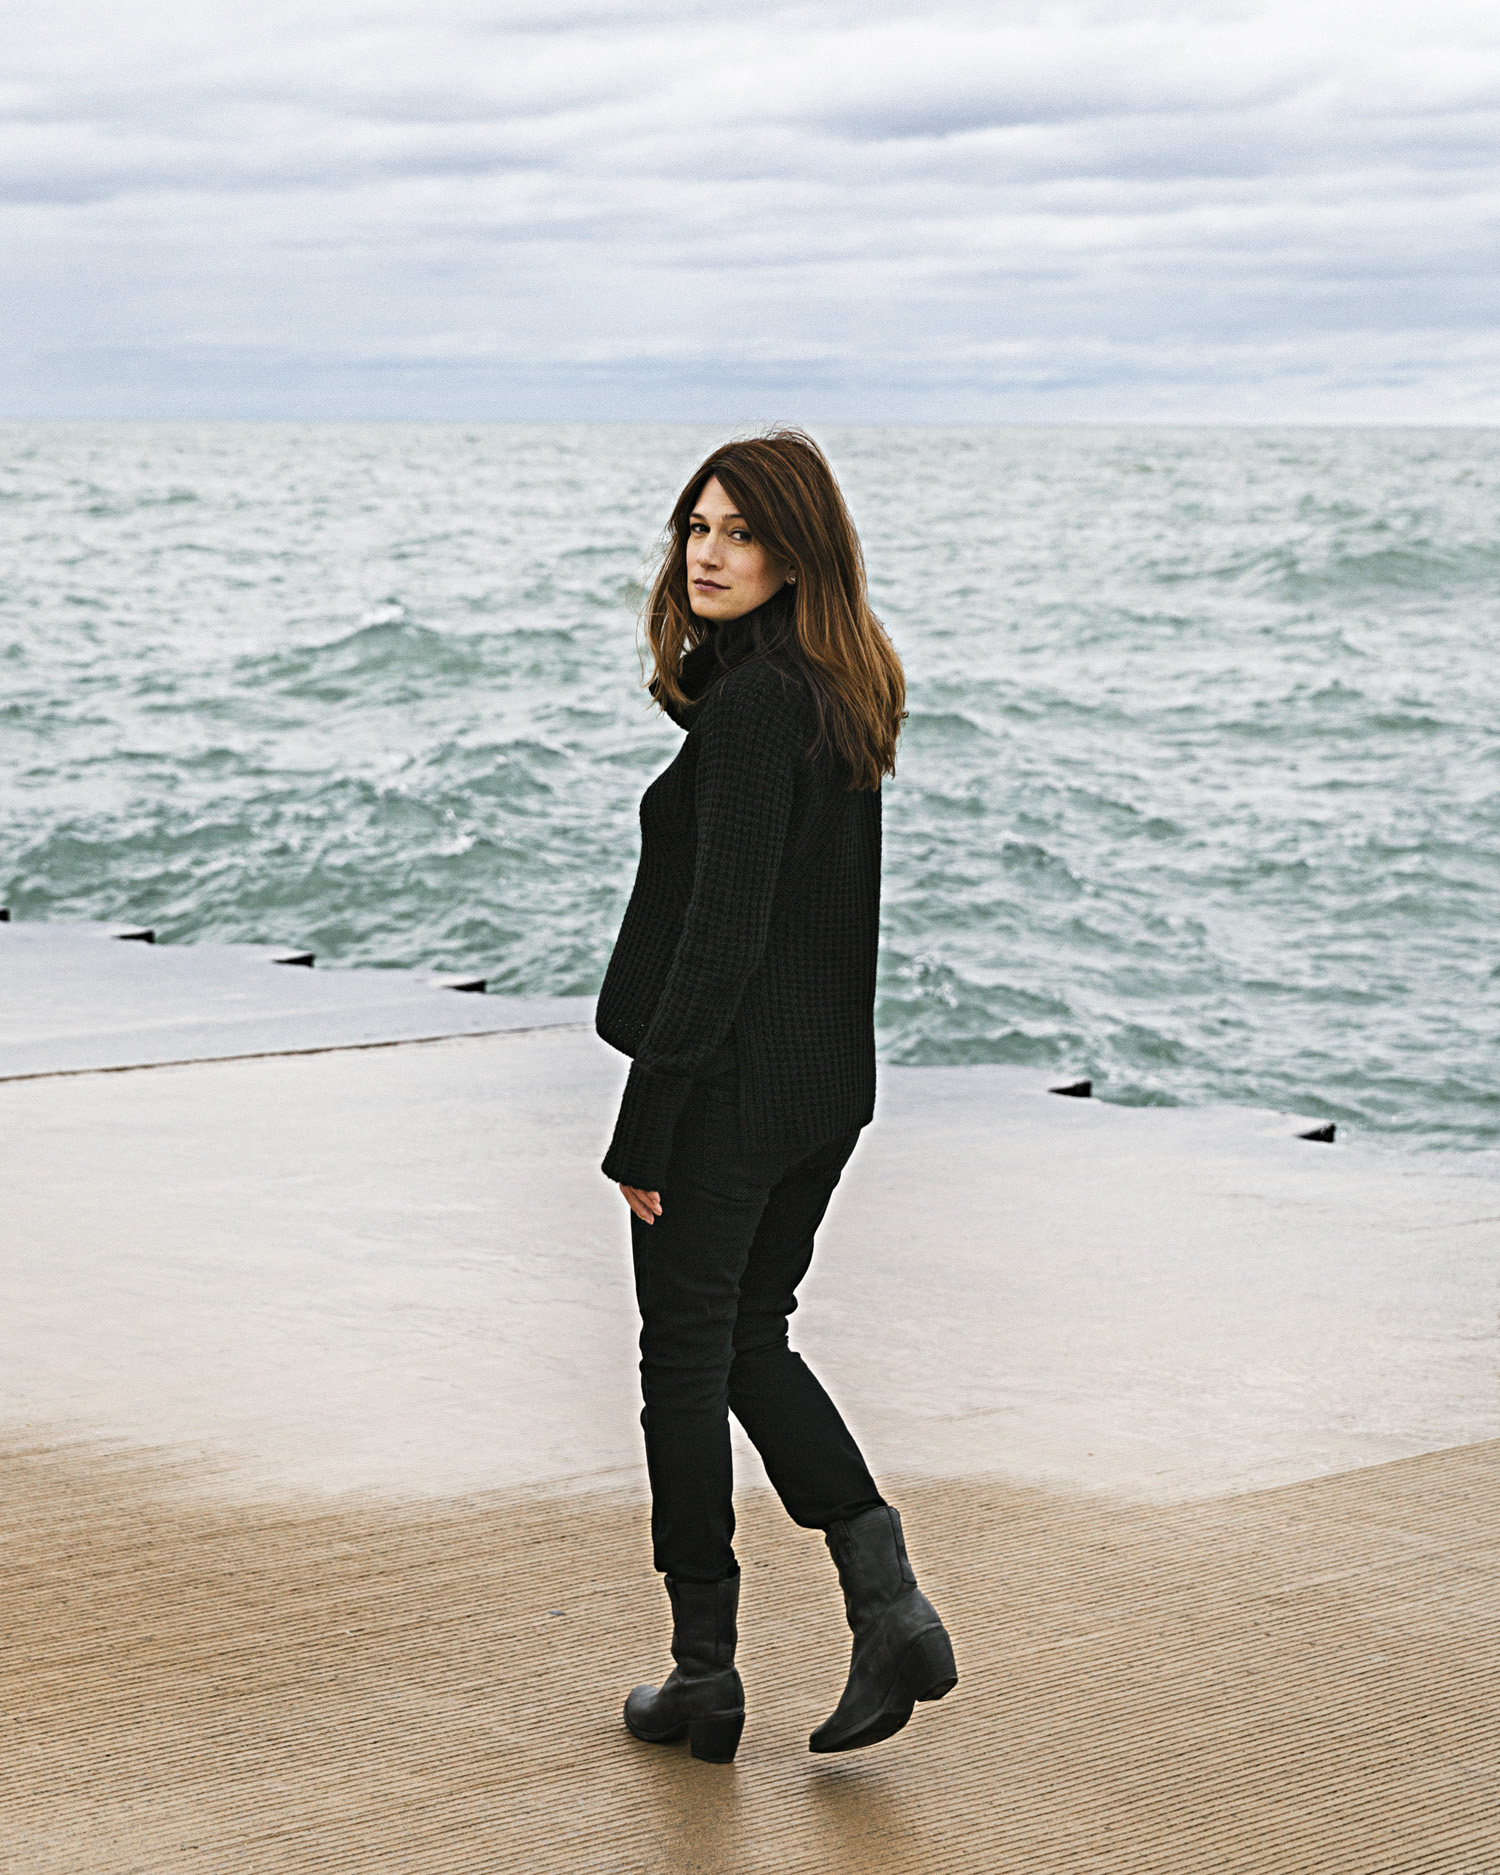 Gone Girl author Flynn on the Lake Michigan waterfront near Chicago’s Lincoln Park (Photograph by Daniel Shea for TIME)